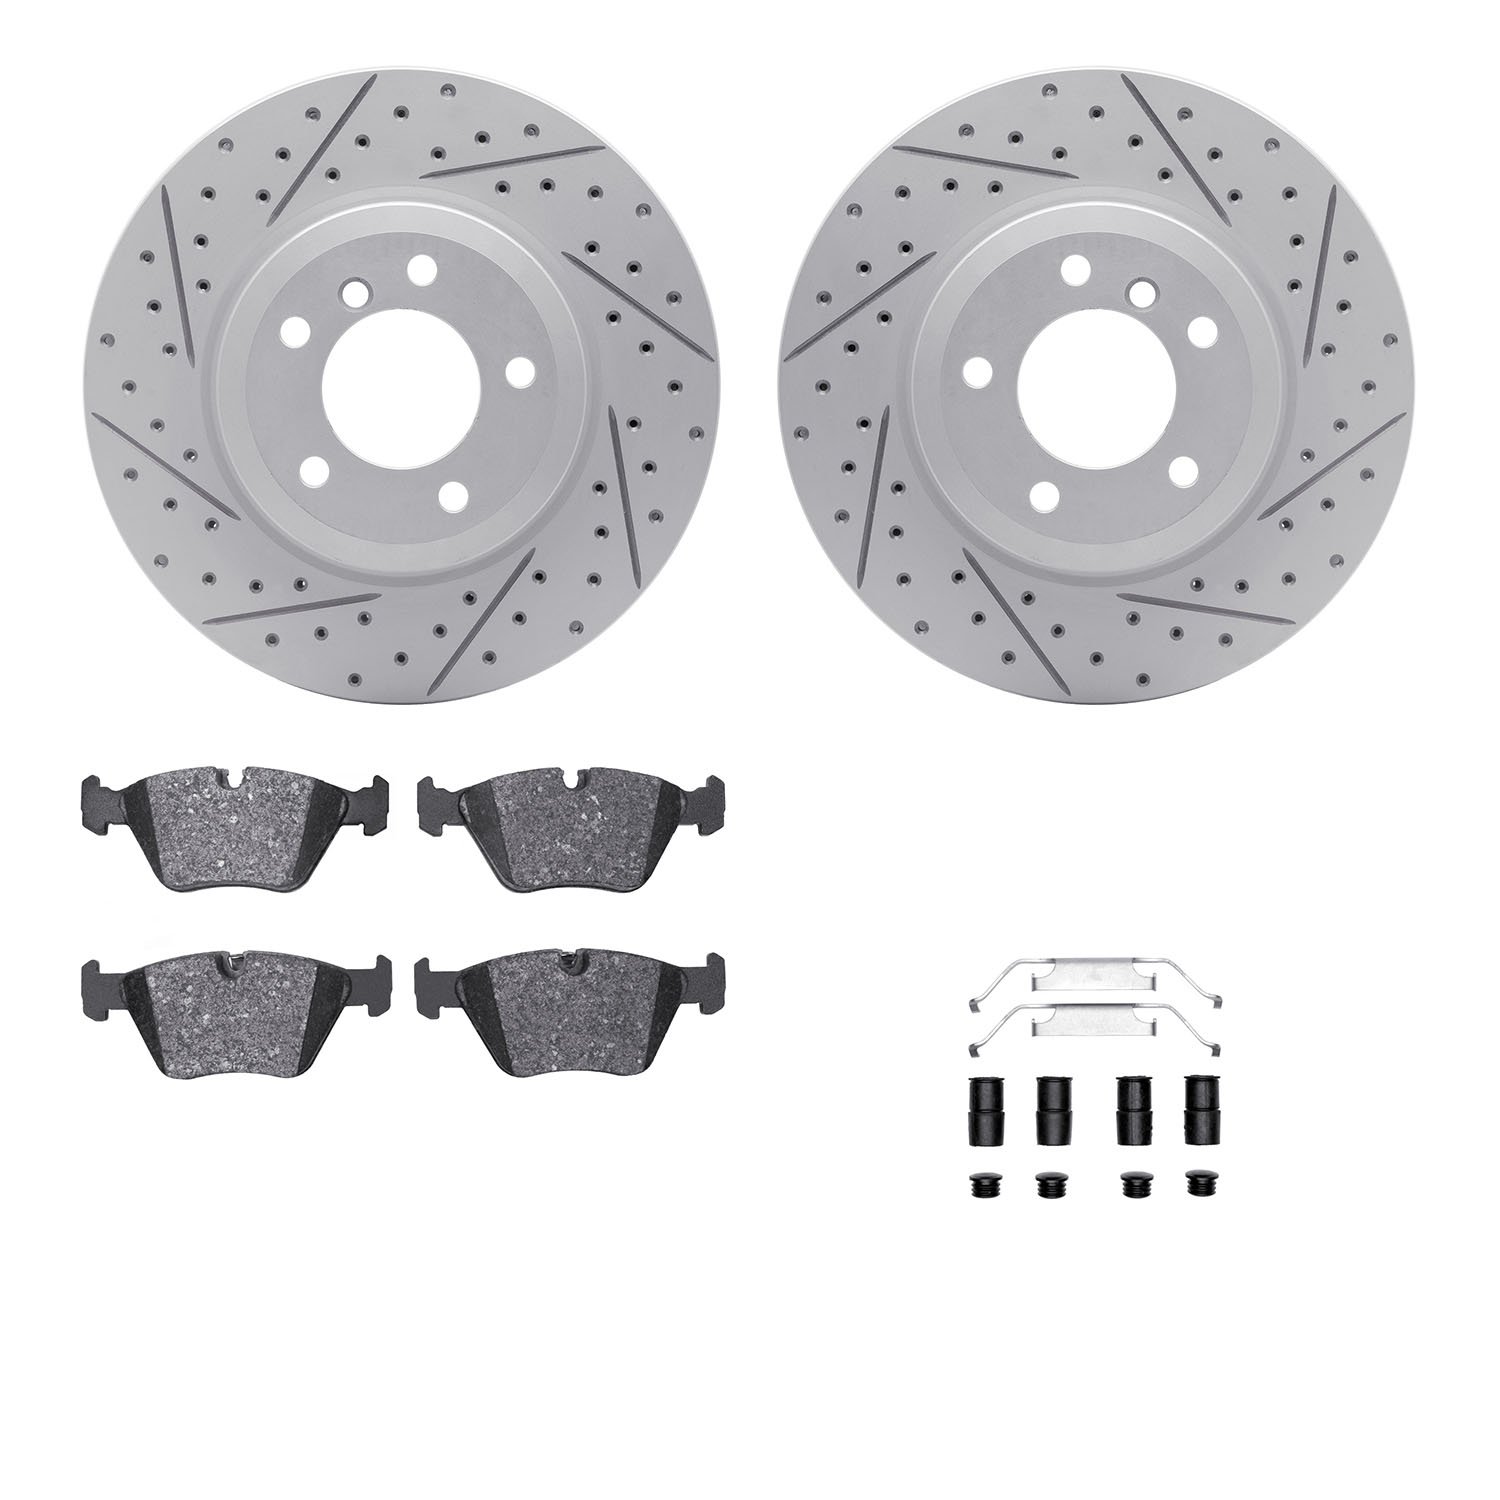 2512-31202 Geoperformance Drilled/Slotted Rotors w/5000 Advanced Brake Pads Kit & Hardware, 2001-2008 BMW, Position: Front